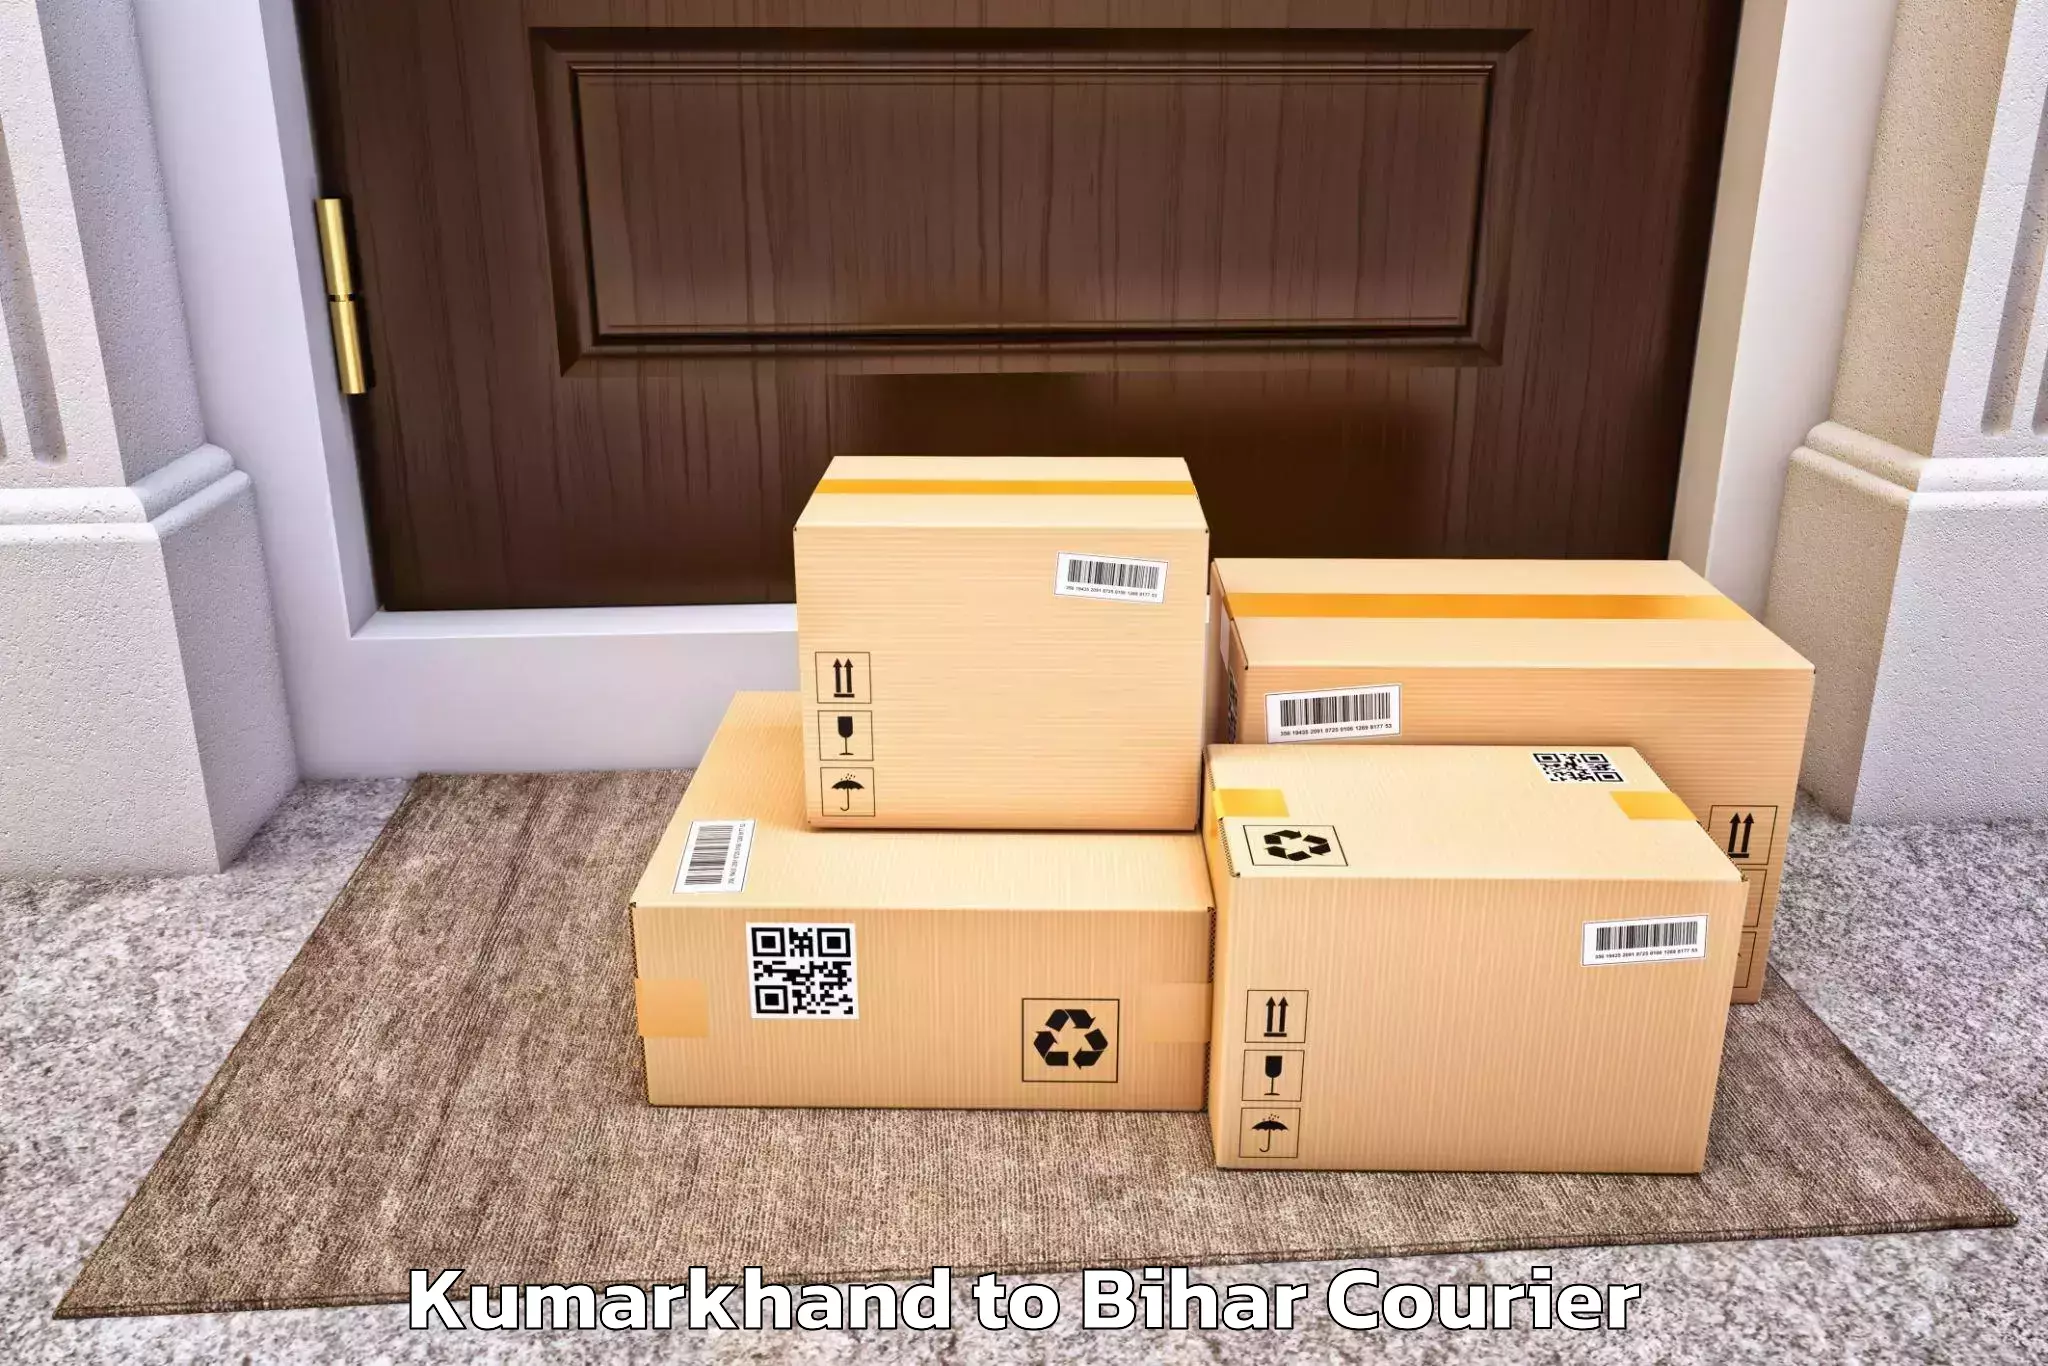 Advanced moving solutions Kumarkhand to Bankipore